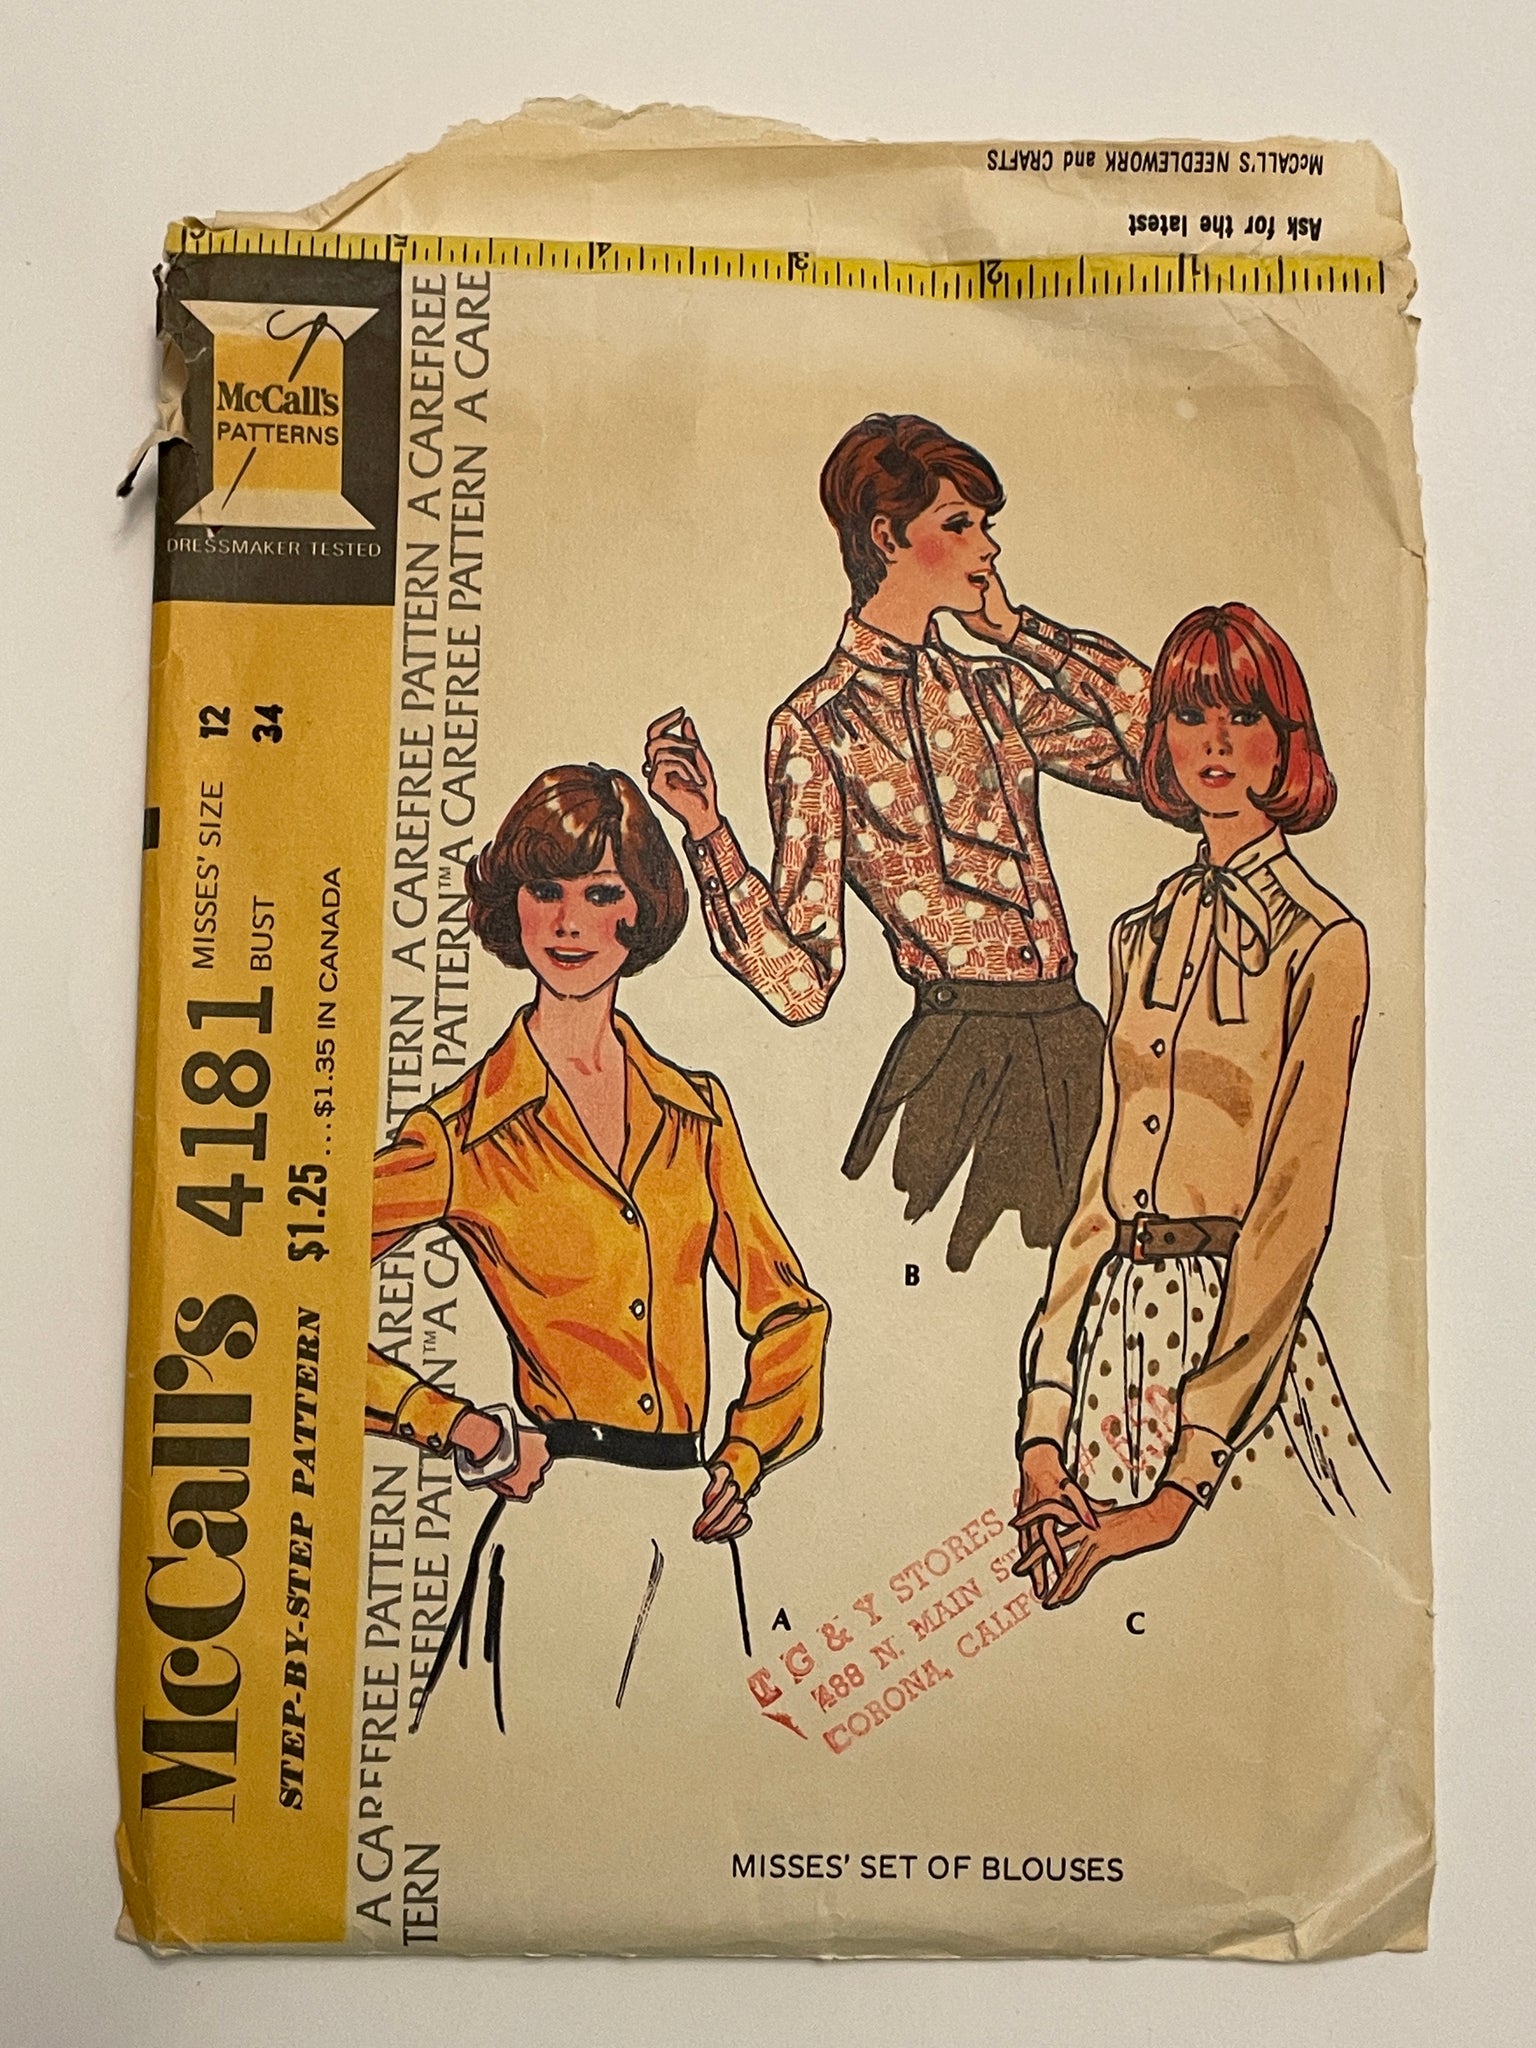 SALE 1974 McCall's Pattern 4181 - Blouses